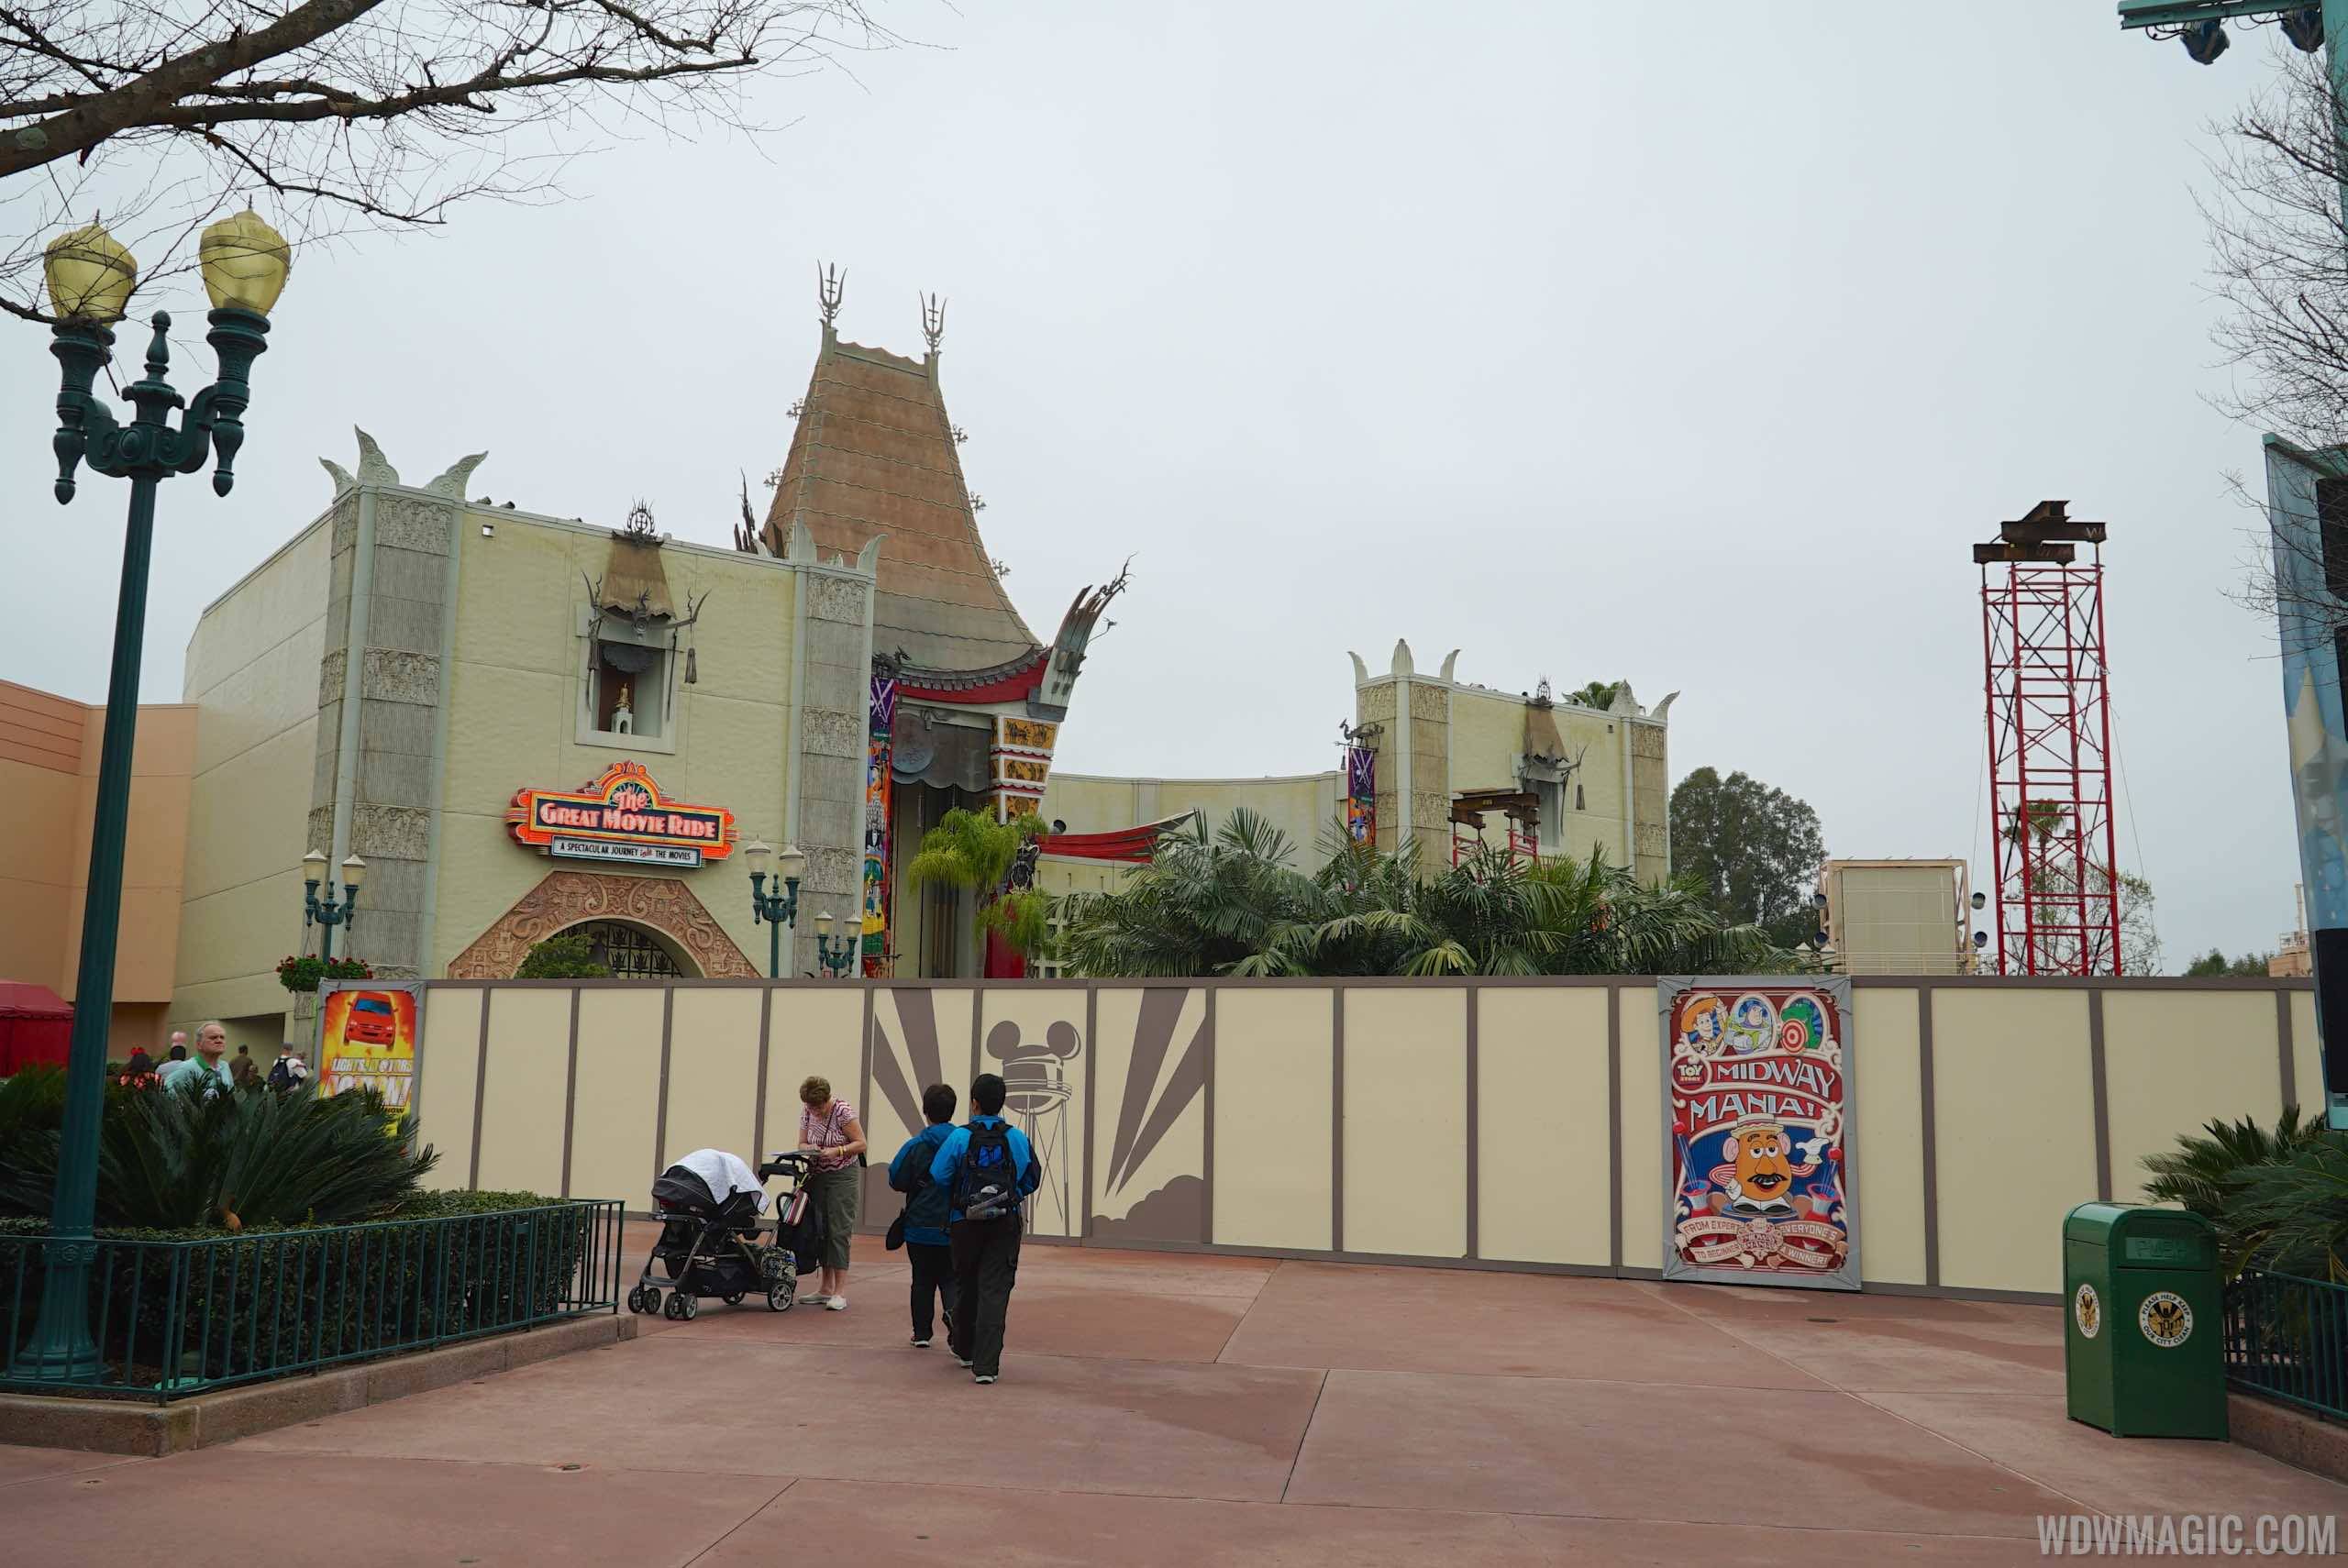 PHOTOS - Sorcerer Mickey Hat icon demolition very near complete